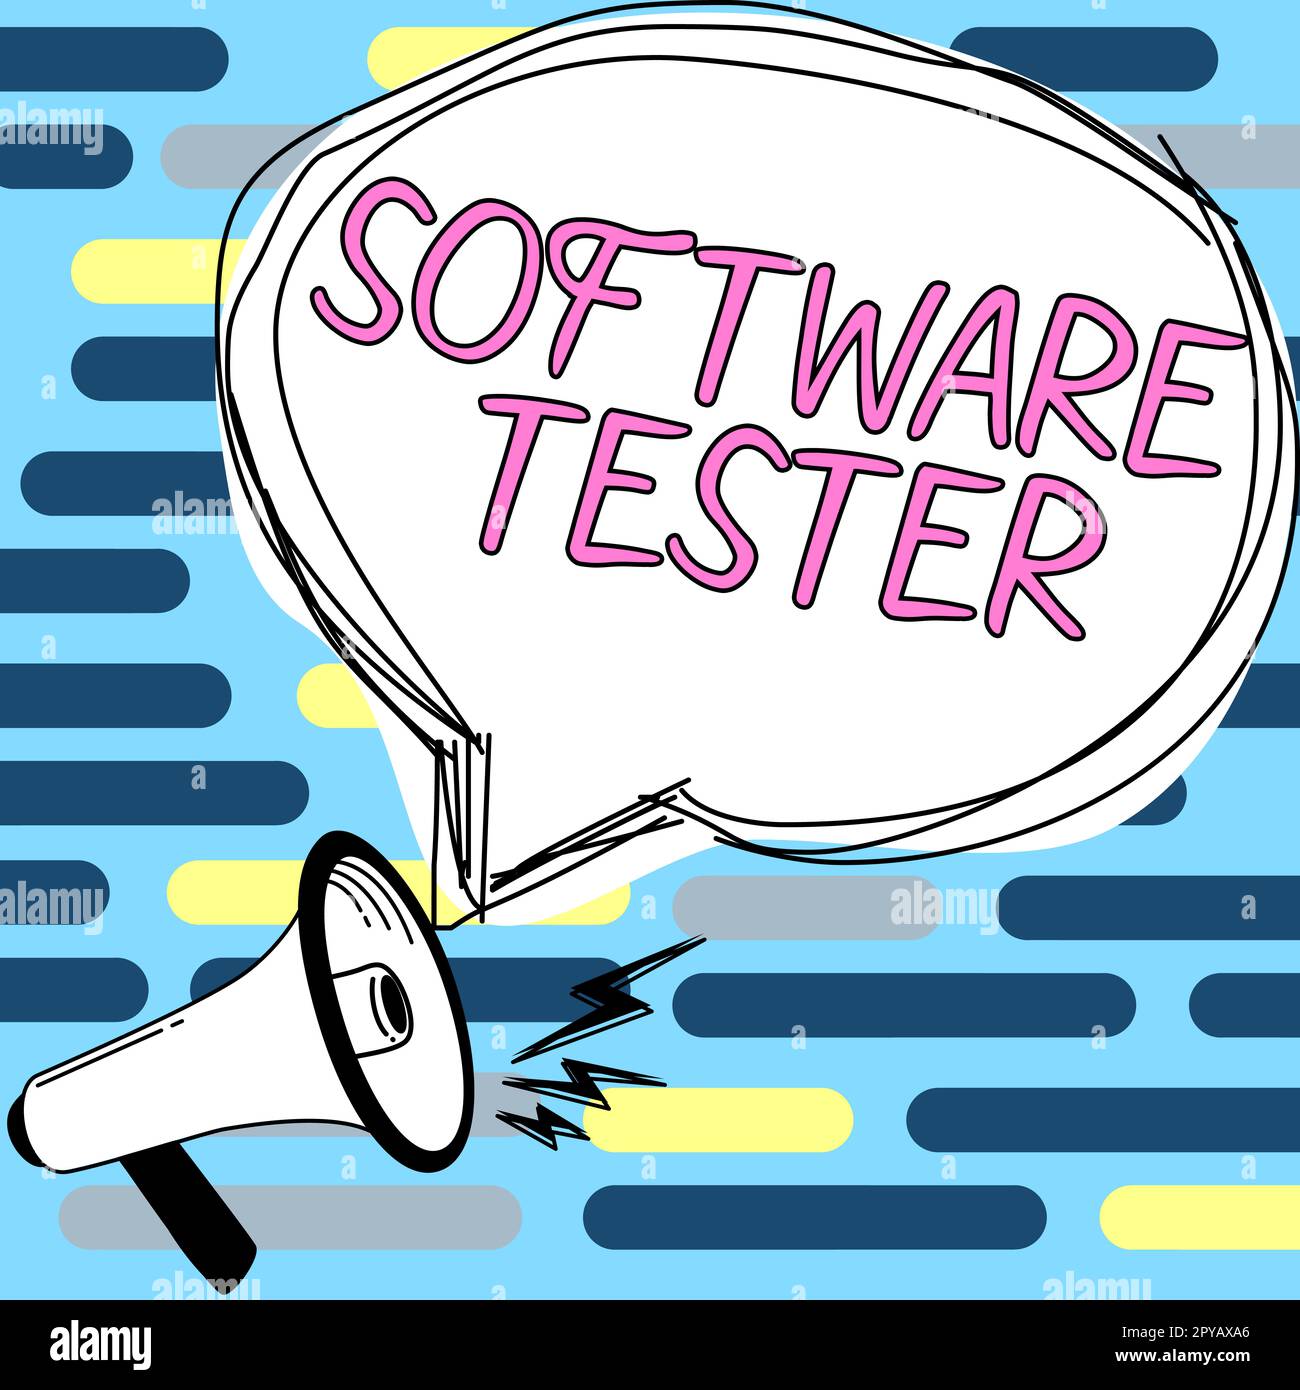 Text caption presenting Software Tester. Word for implemented to protect software against malicious attack Stock Photo